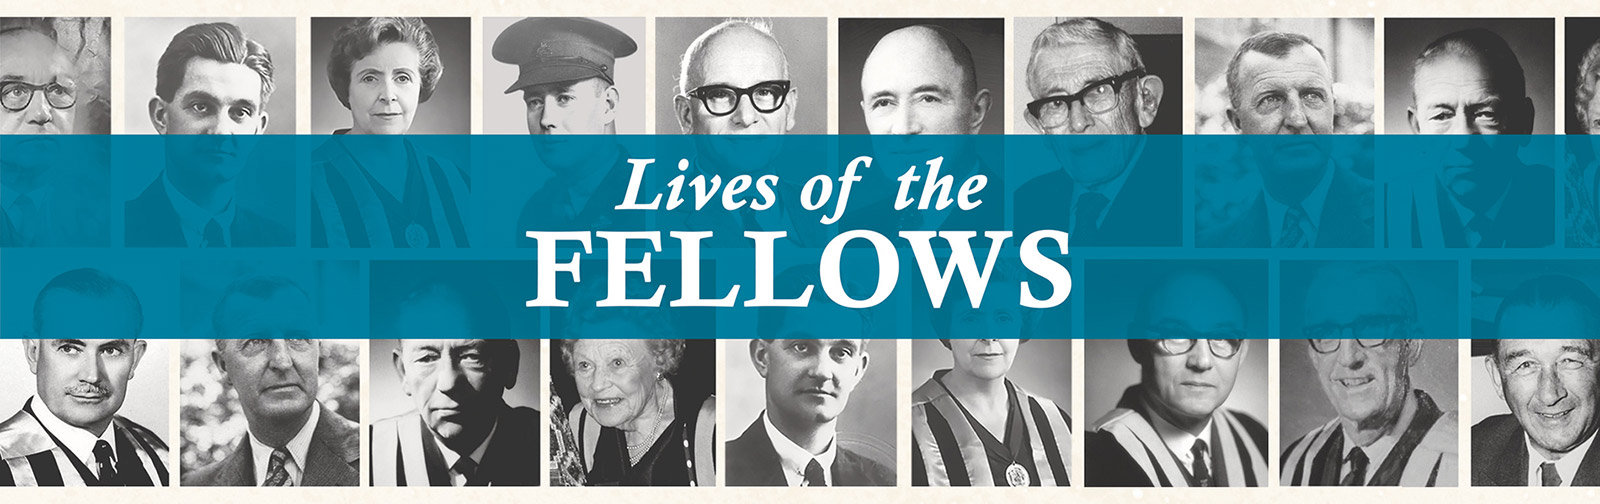 Lives of the Fellows Online Exhibition